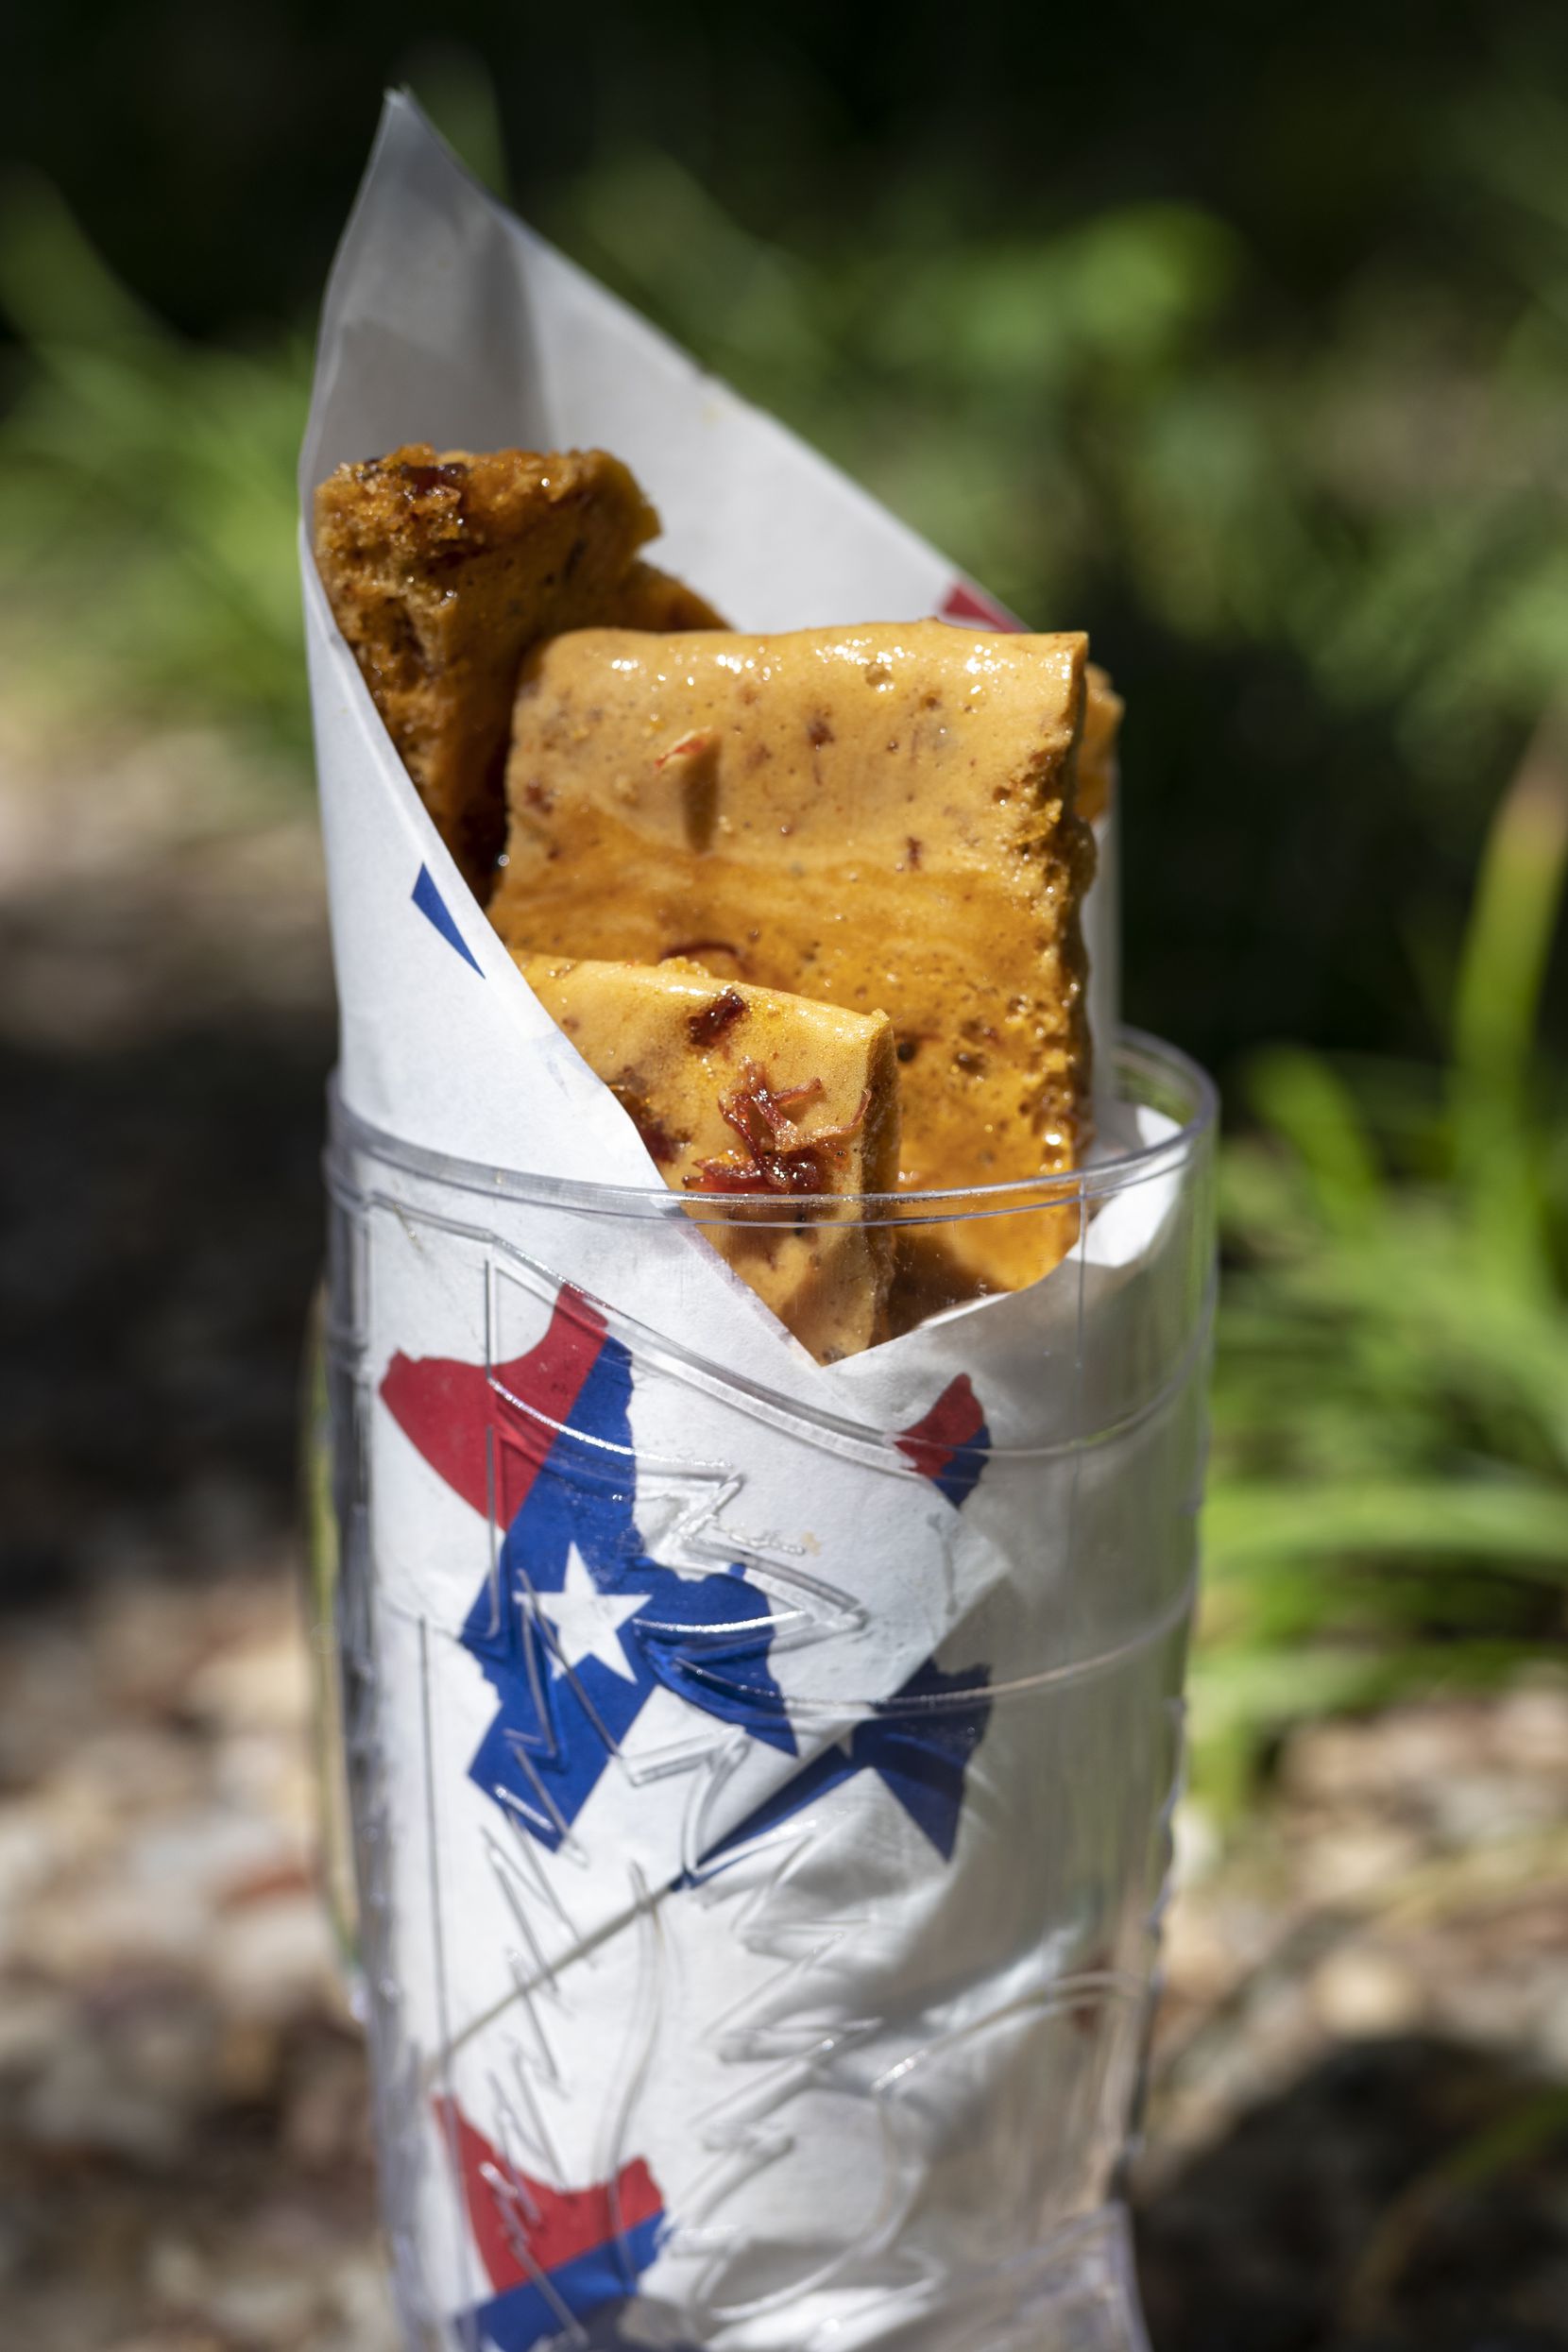 Here's a good thing about the Brisket Bristle: you can take home this cute plastic tumbler.